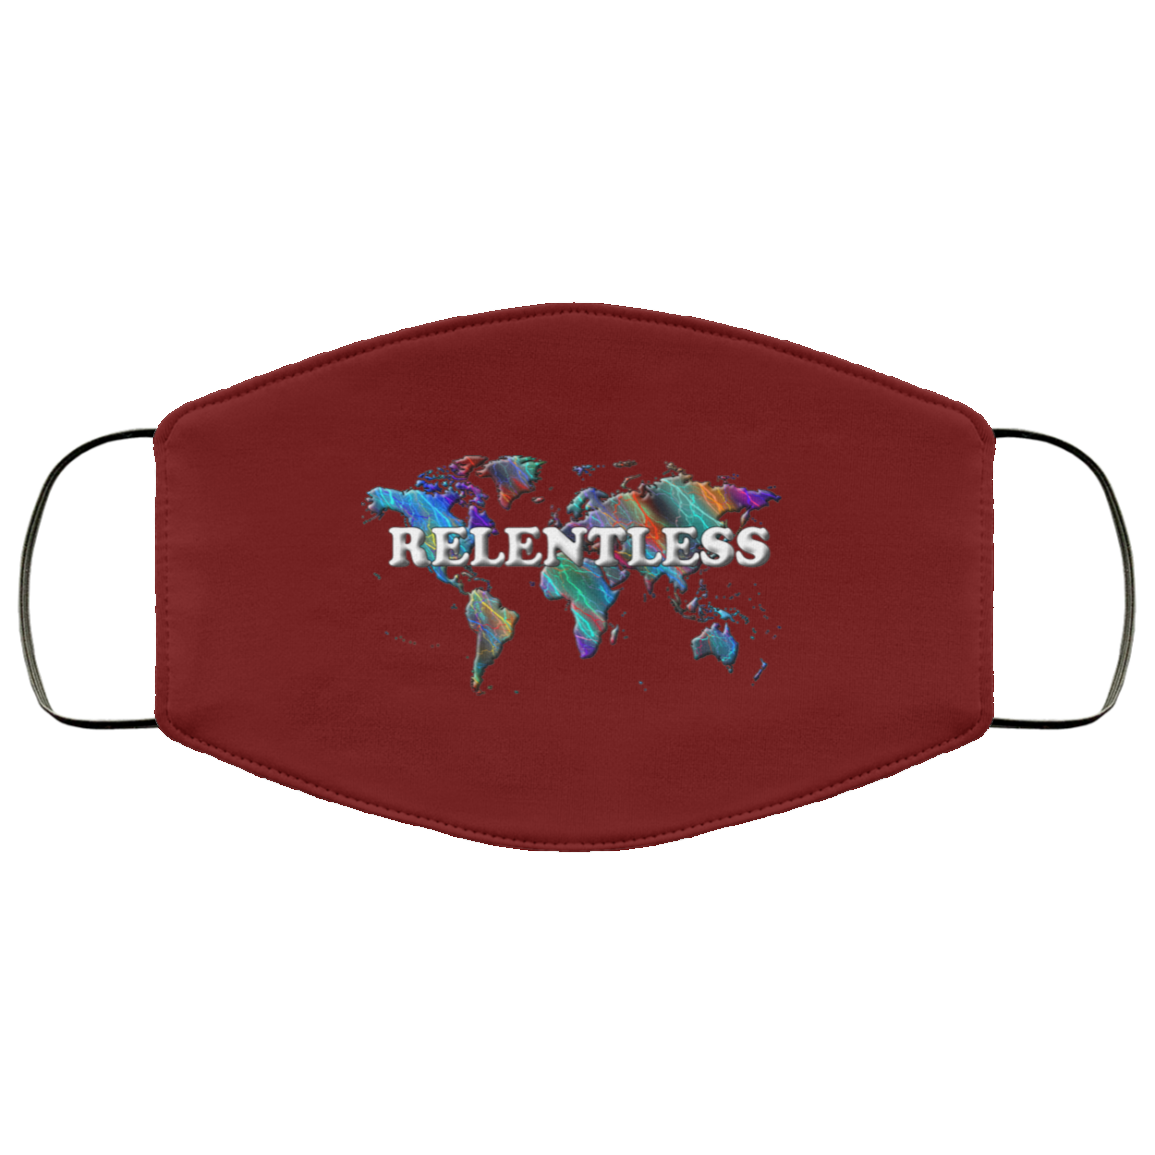 Relentless 2 Layer Protective Mask